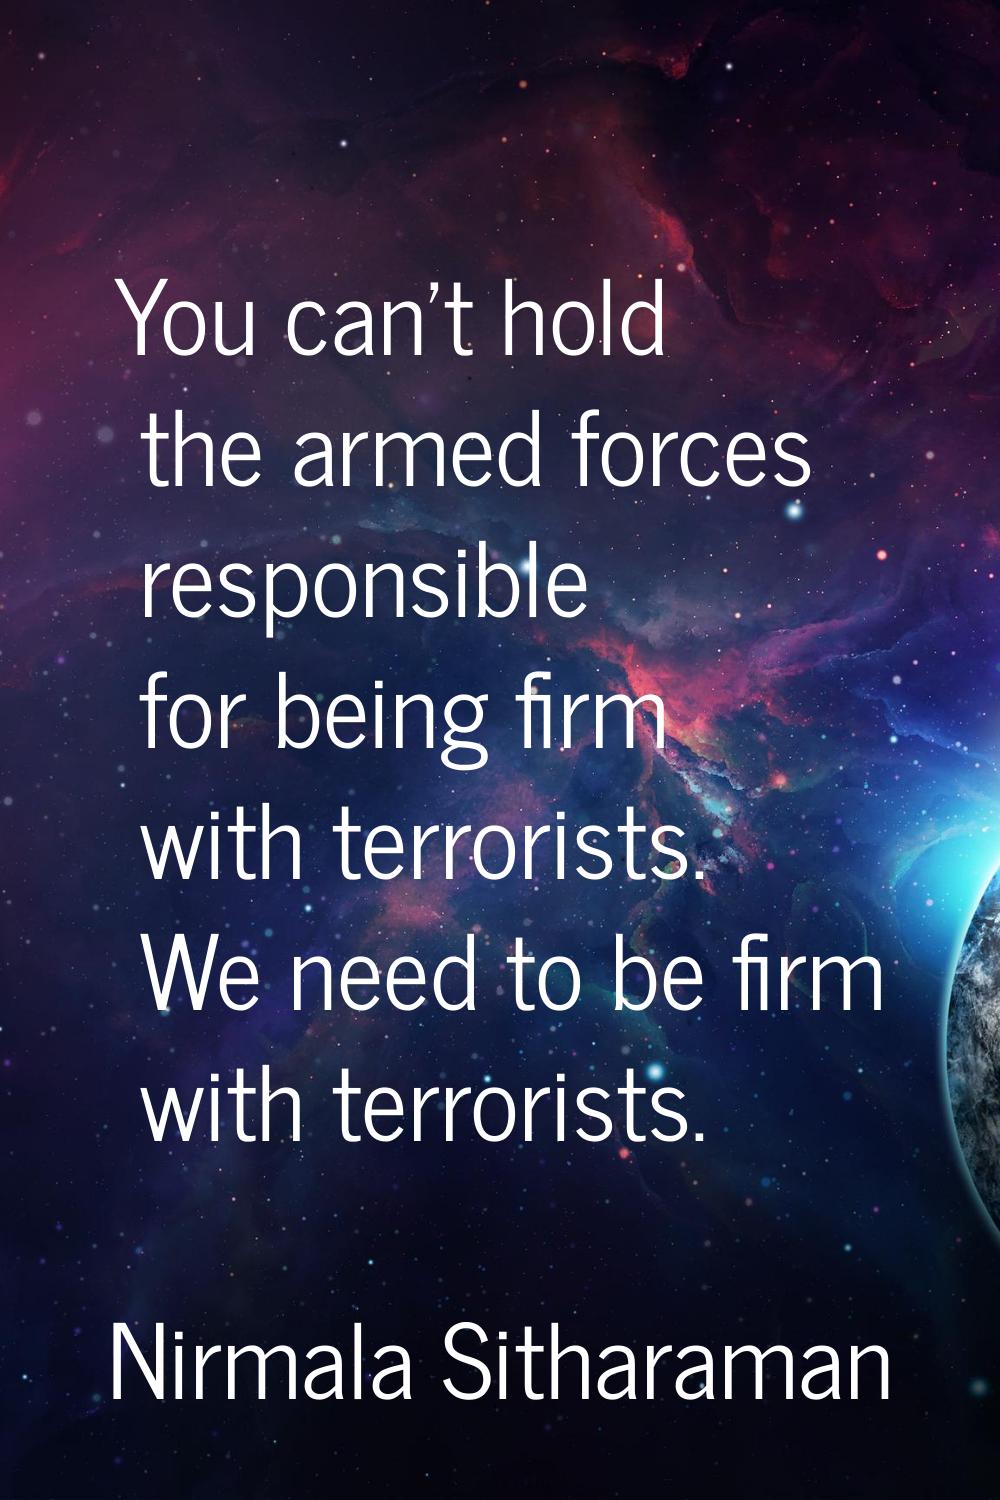 You can't hold the armed forces responsible for being firm with terrorists. We need to be firm with